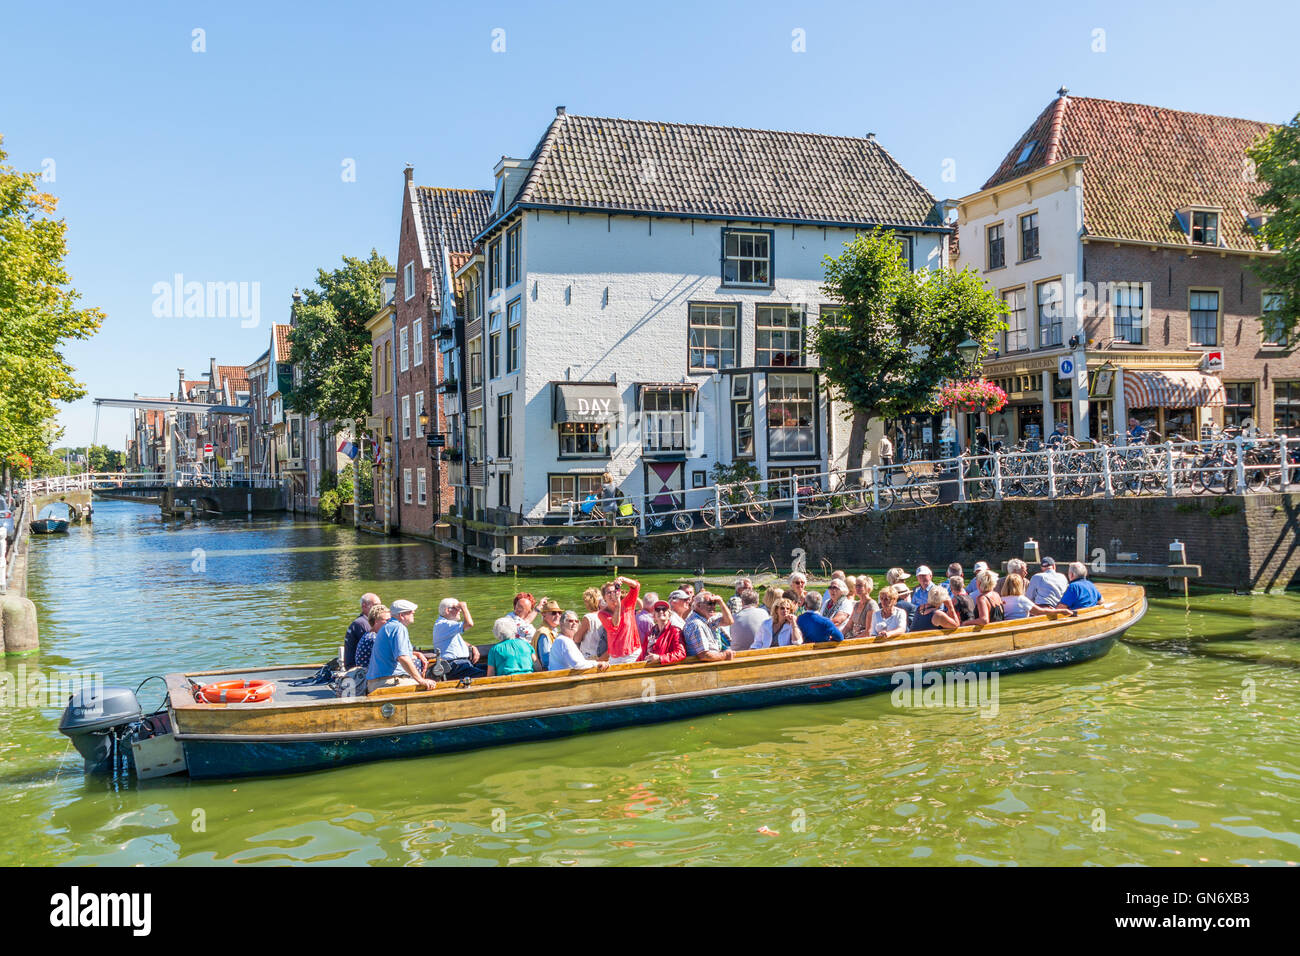 Tourists sightseeing in boat on Zijdam canal in Alkmaar, North Holland, Netherlands Stock Photo